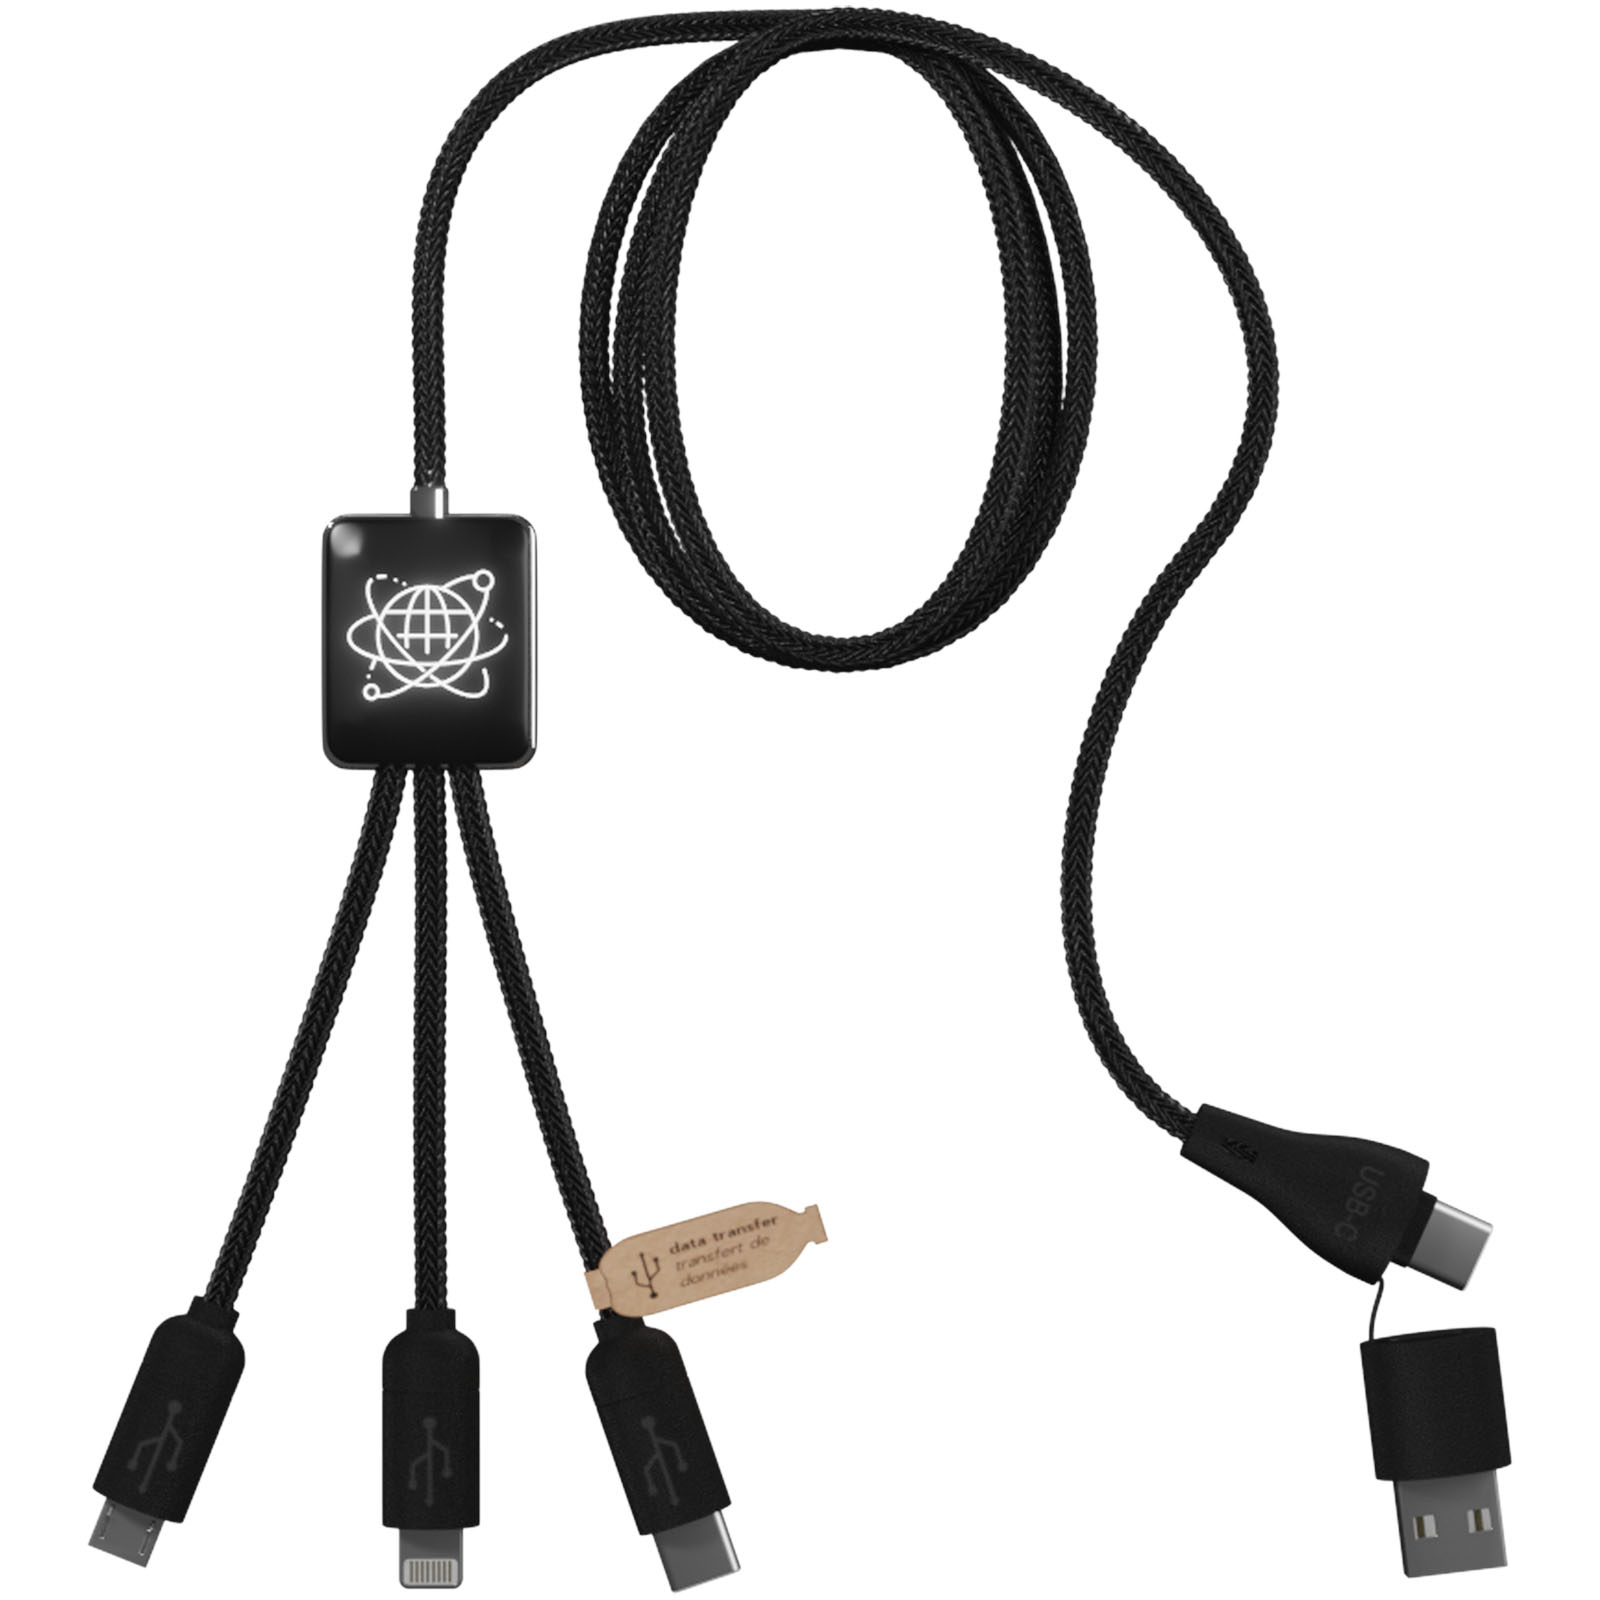 EcoCharge 5-in-1 Light-Up Logo Charging Cable - Wetheringsett - Hindhead